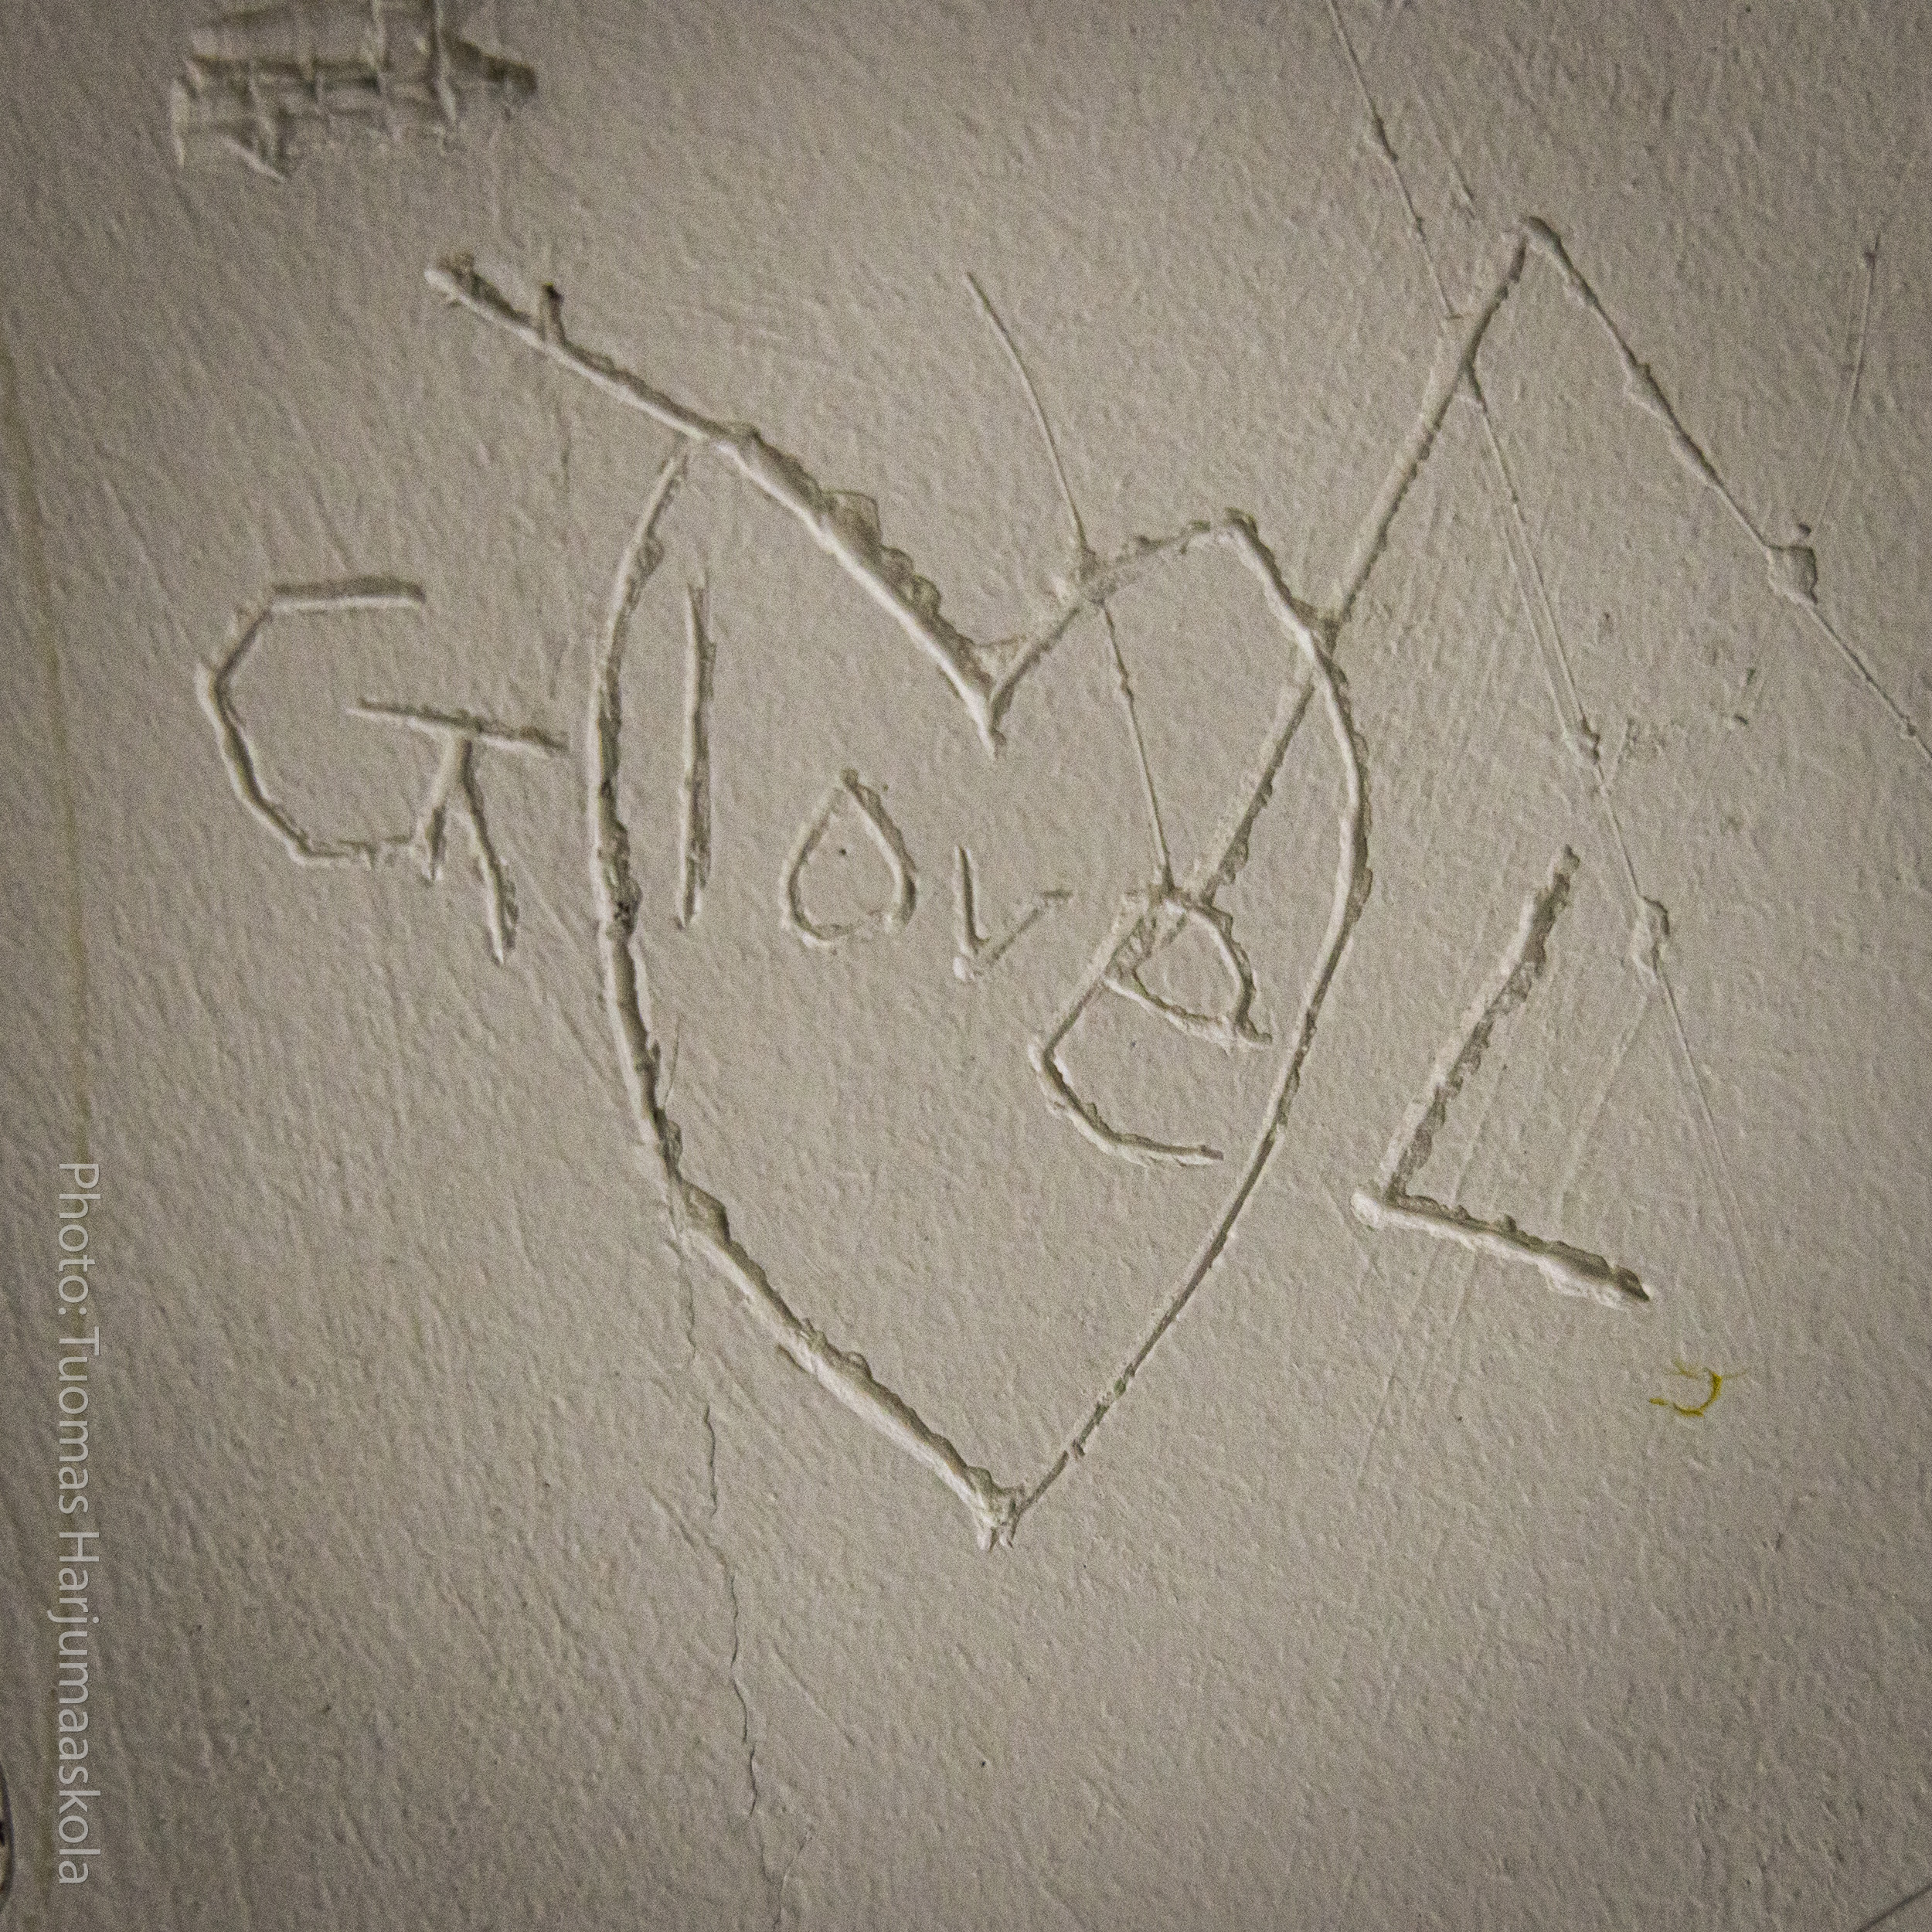 A confession of love scratched on the wall. “G love L.” Photographer by Tuomas Harjumaaskola.